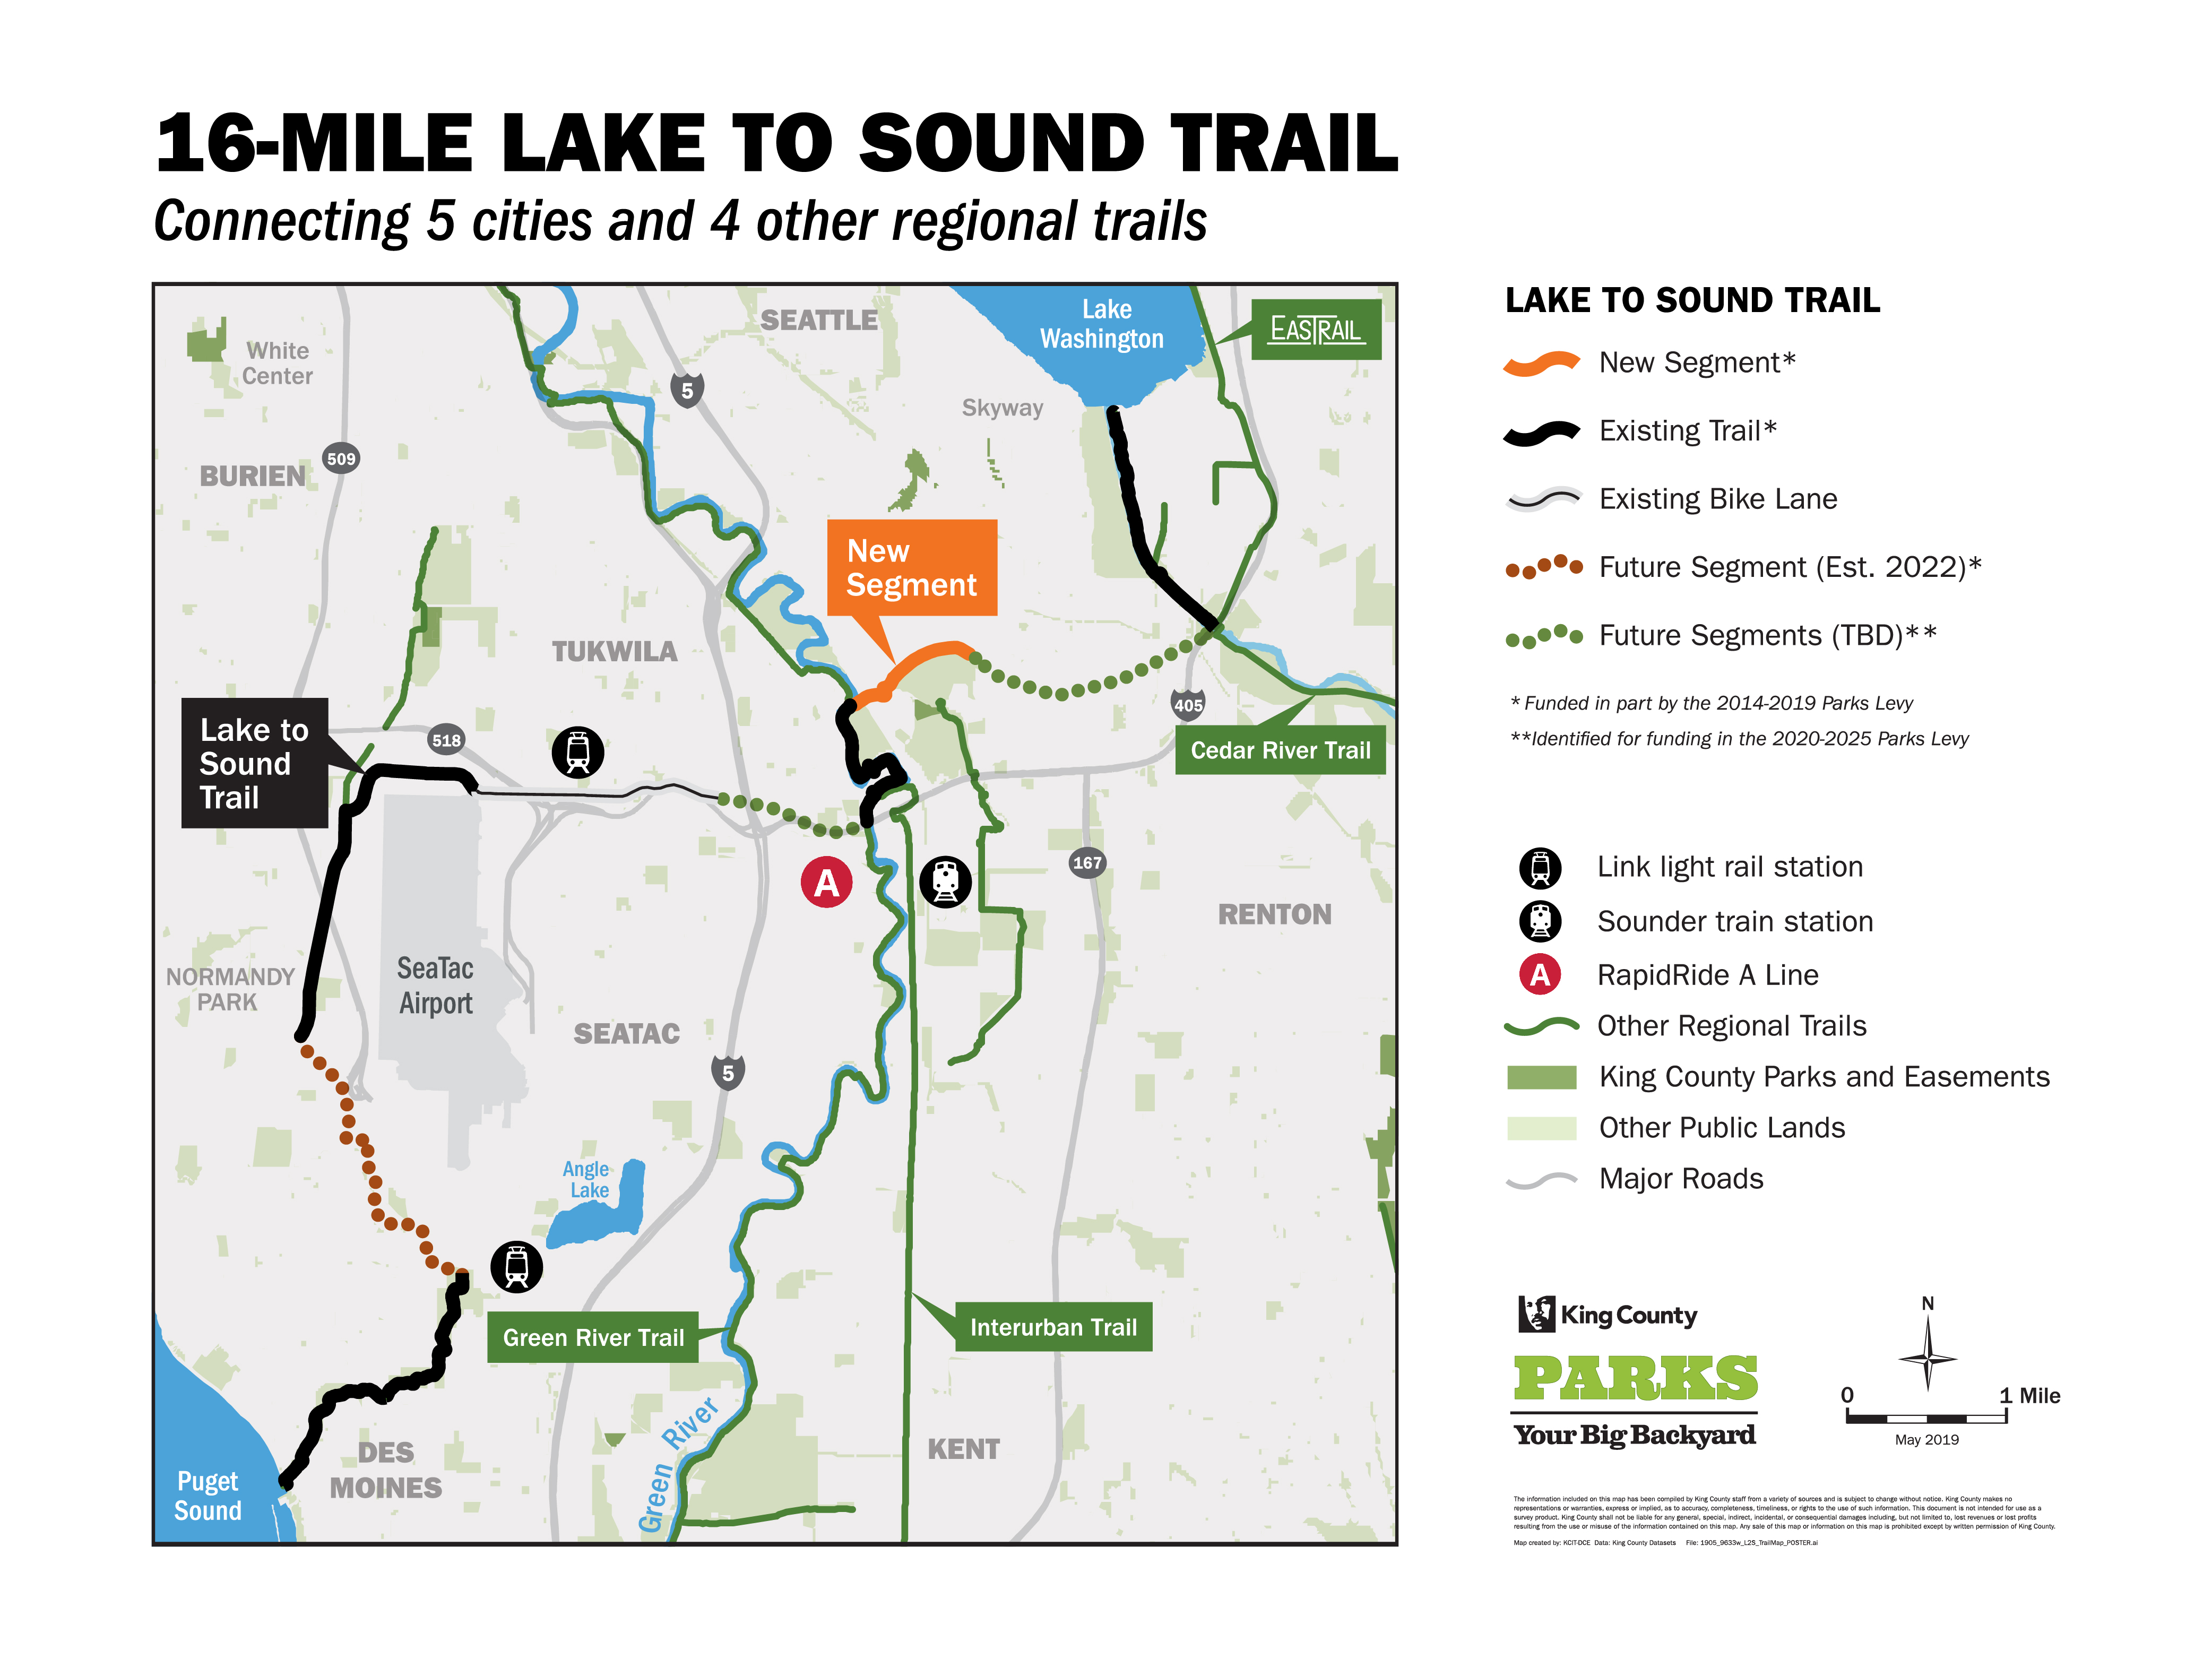 A map of the Lake to Sound Trail